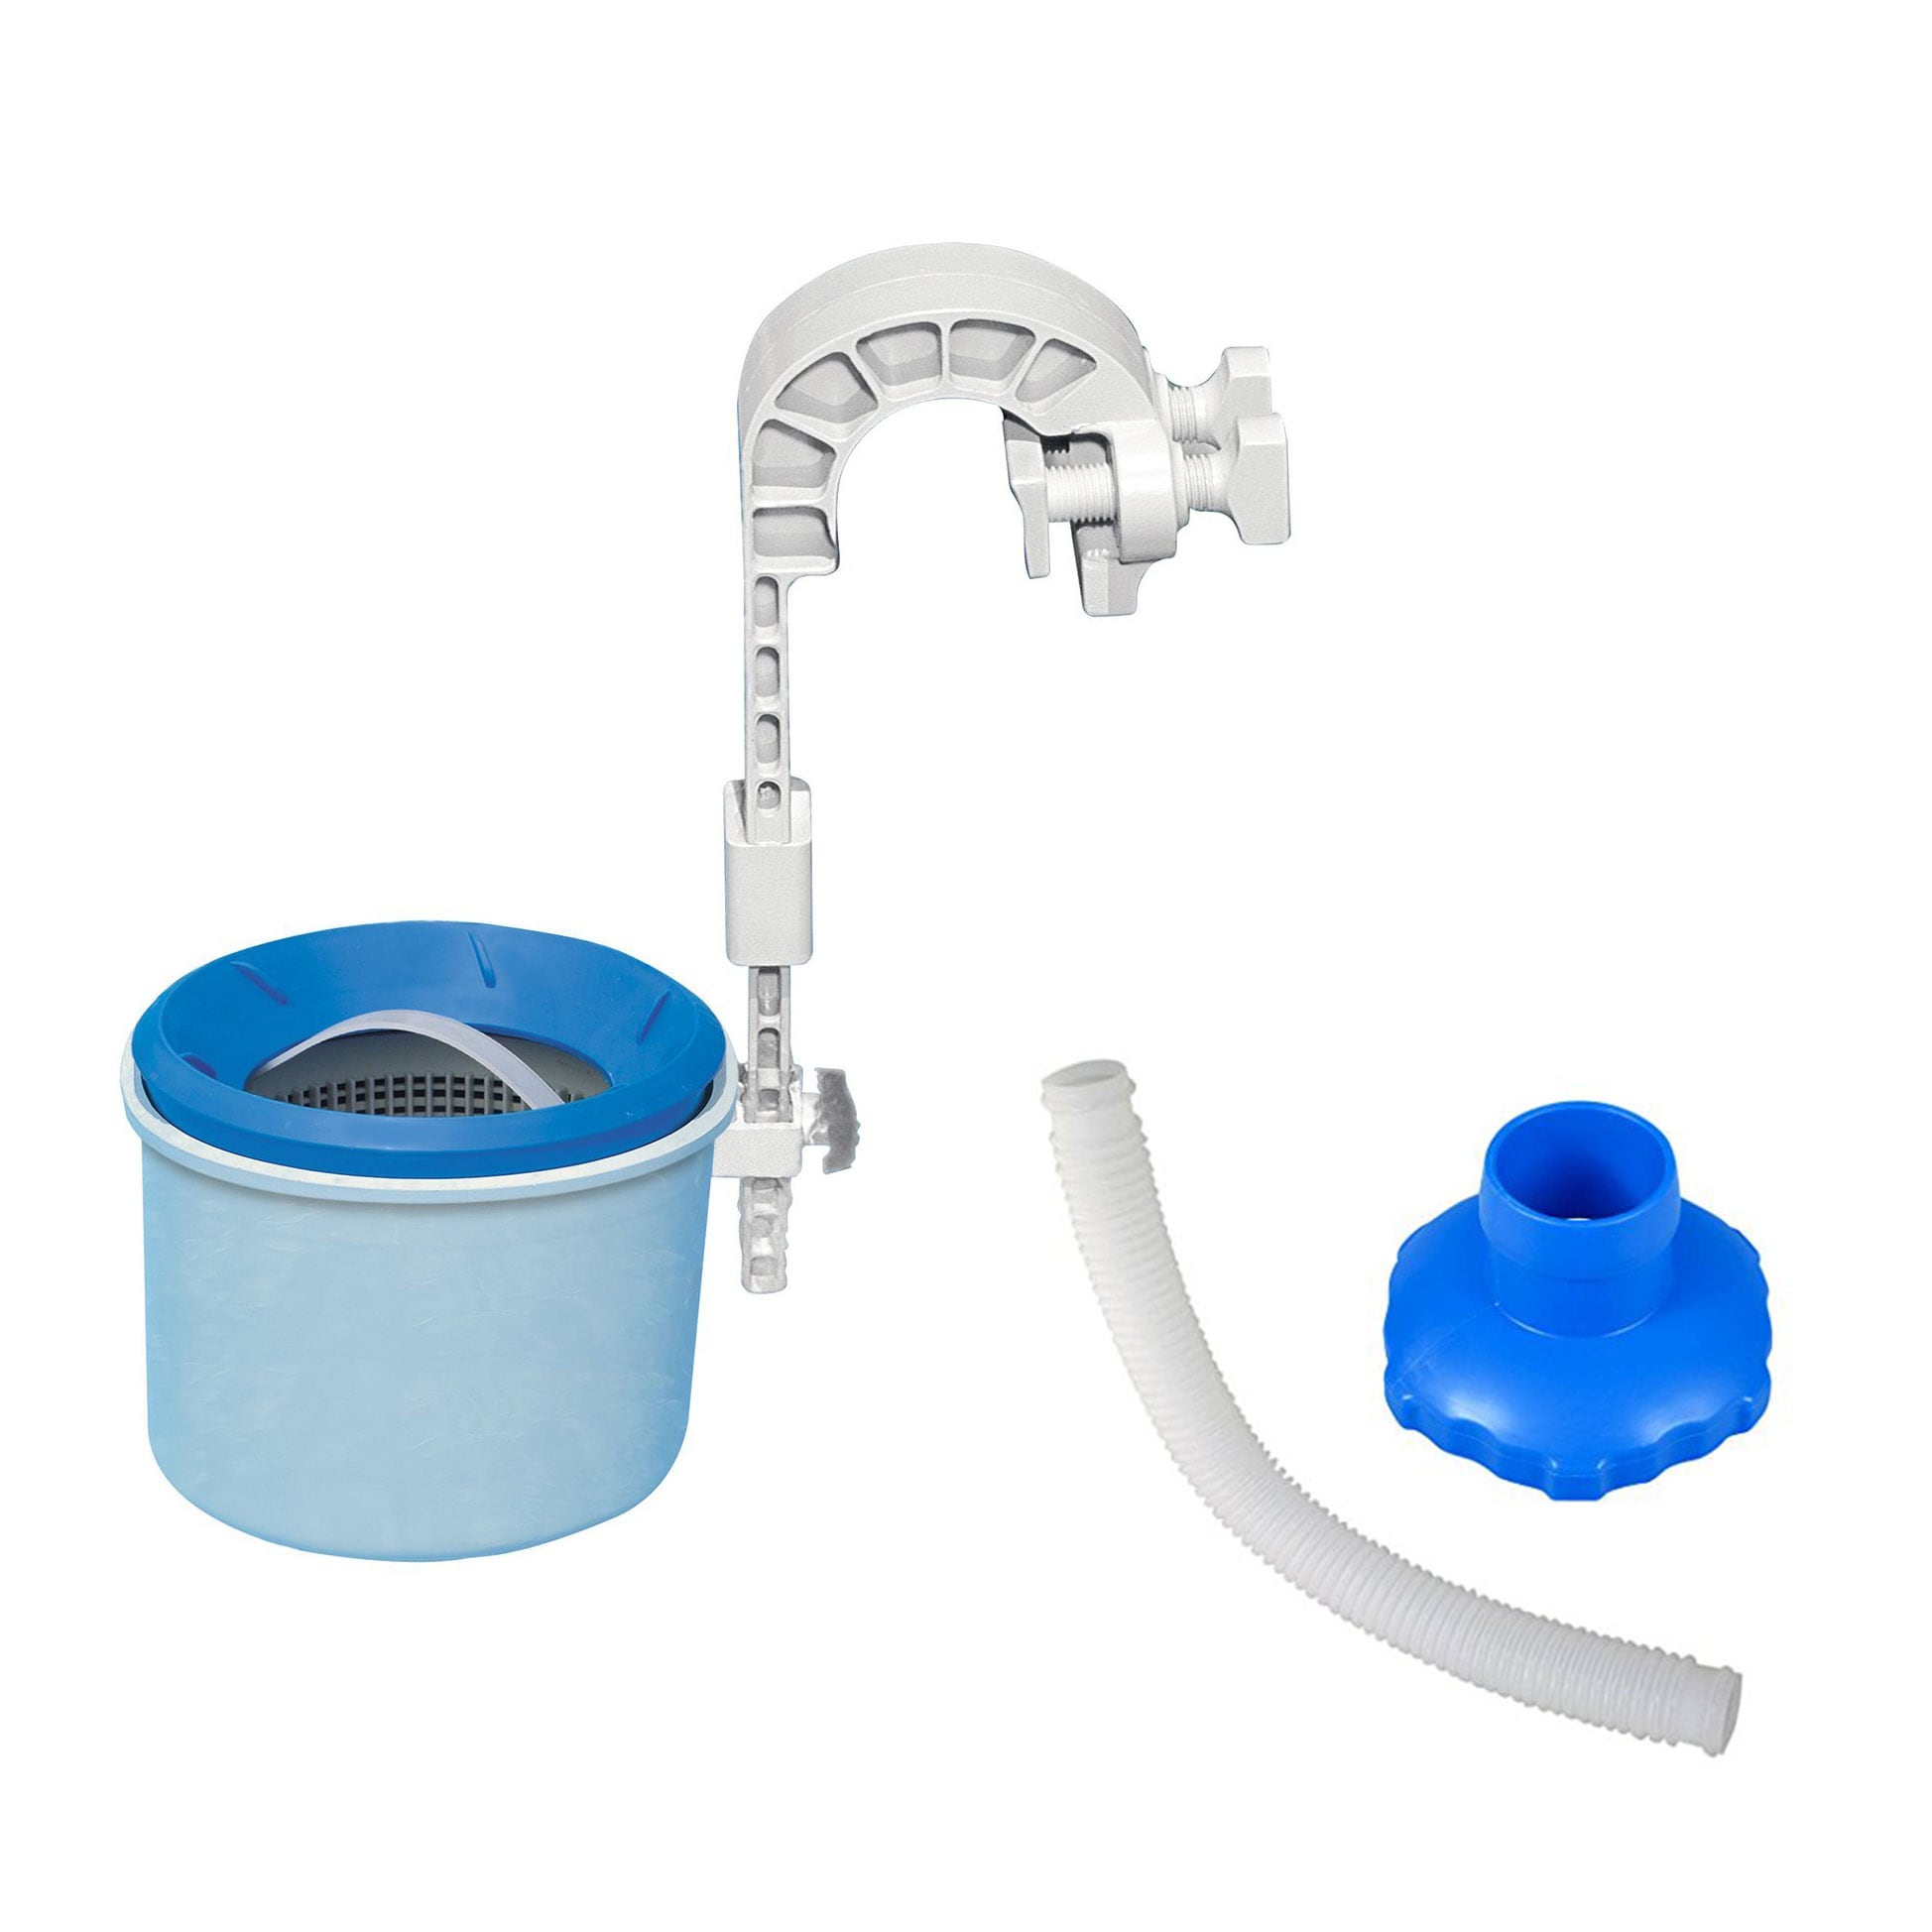 Adapter Parts Skimmer B department Systems Intex Pools Deluxe at the and Replacement Hose Skimmer Wall for in Above-Ground with Mount Pool Auto